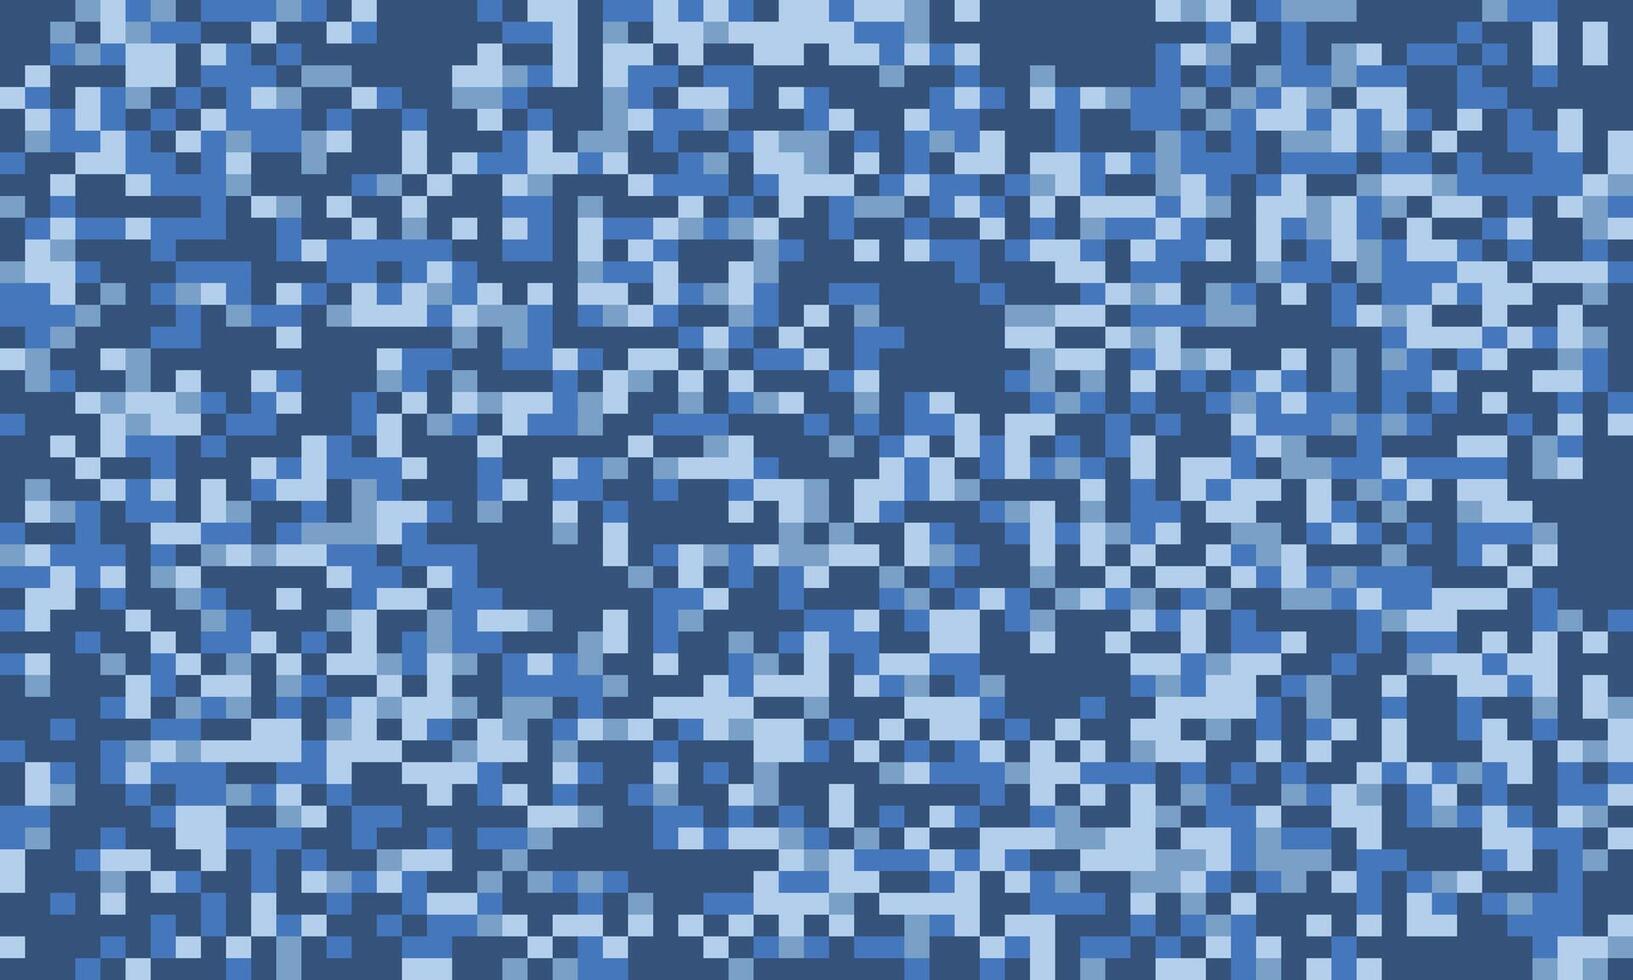 Pixel art navy military army camouflage texture pattern vector